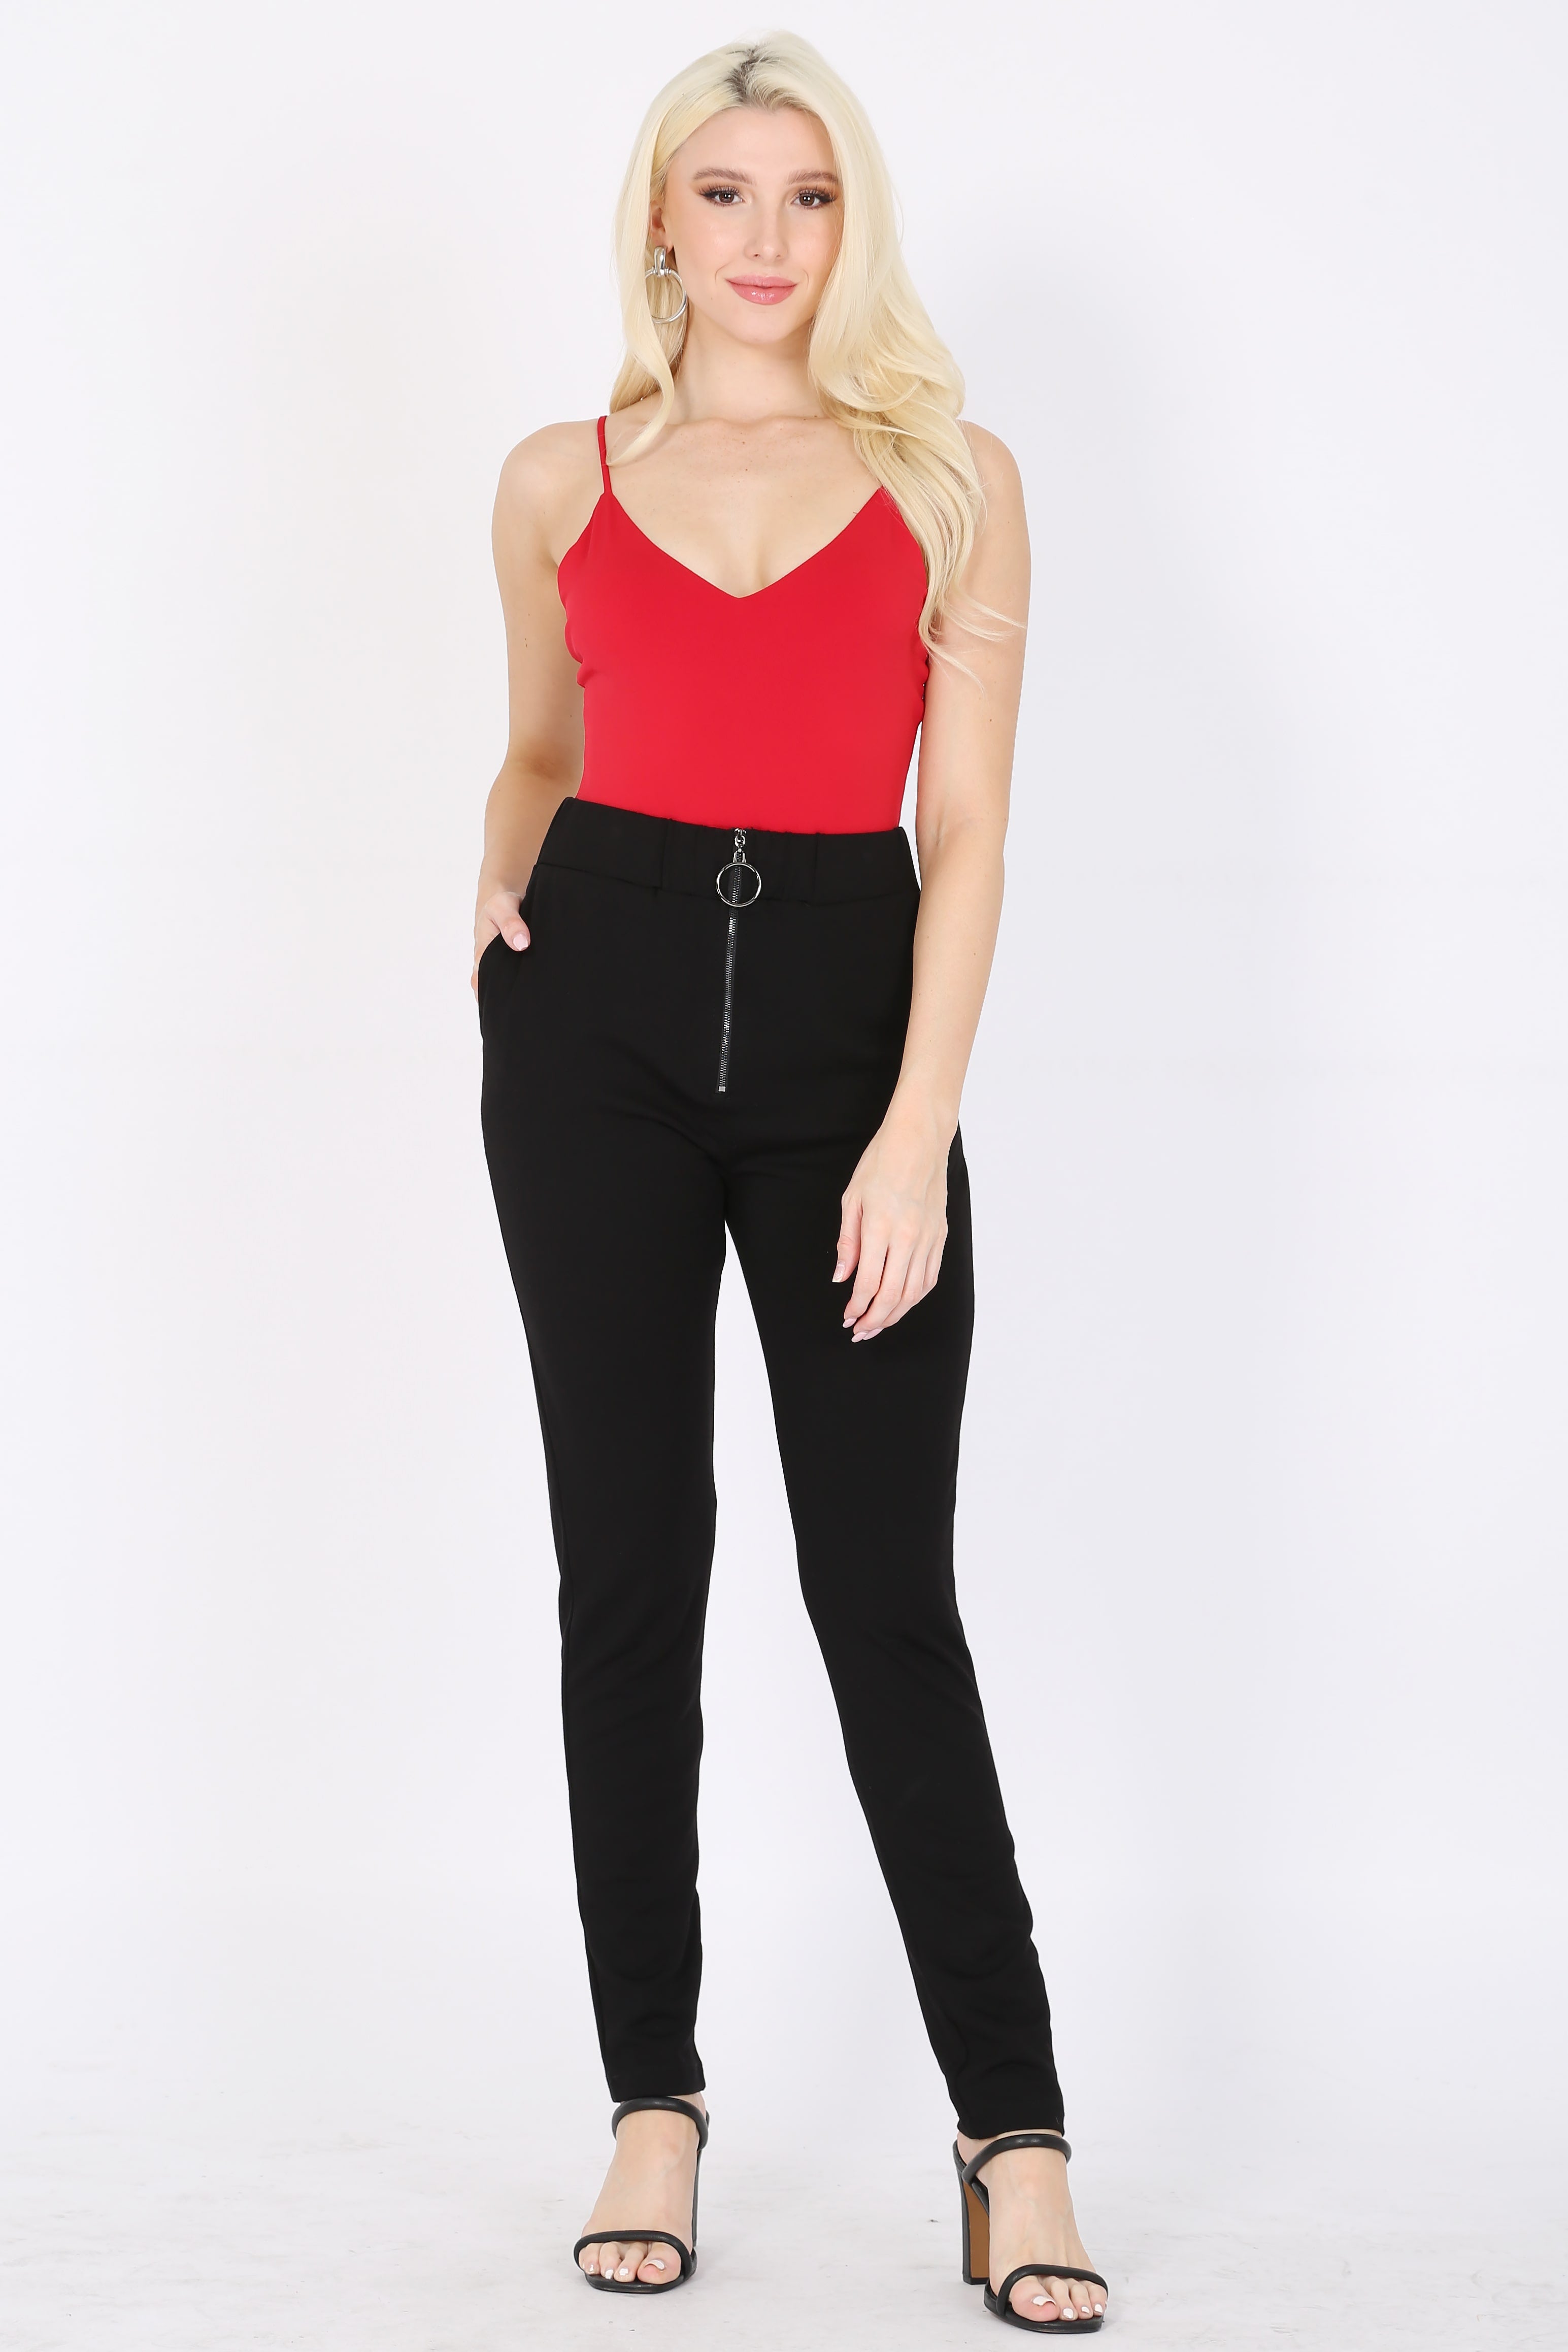 Pants High Waist  with pockets and  front zipper